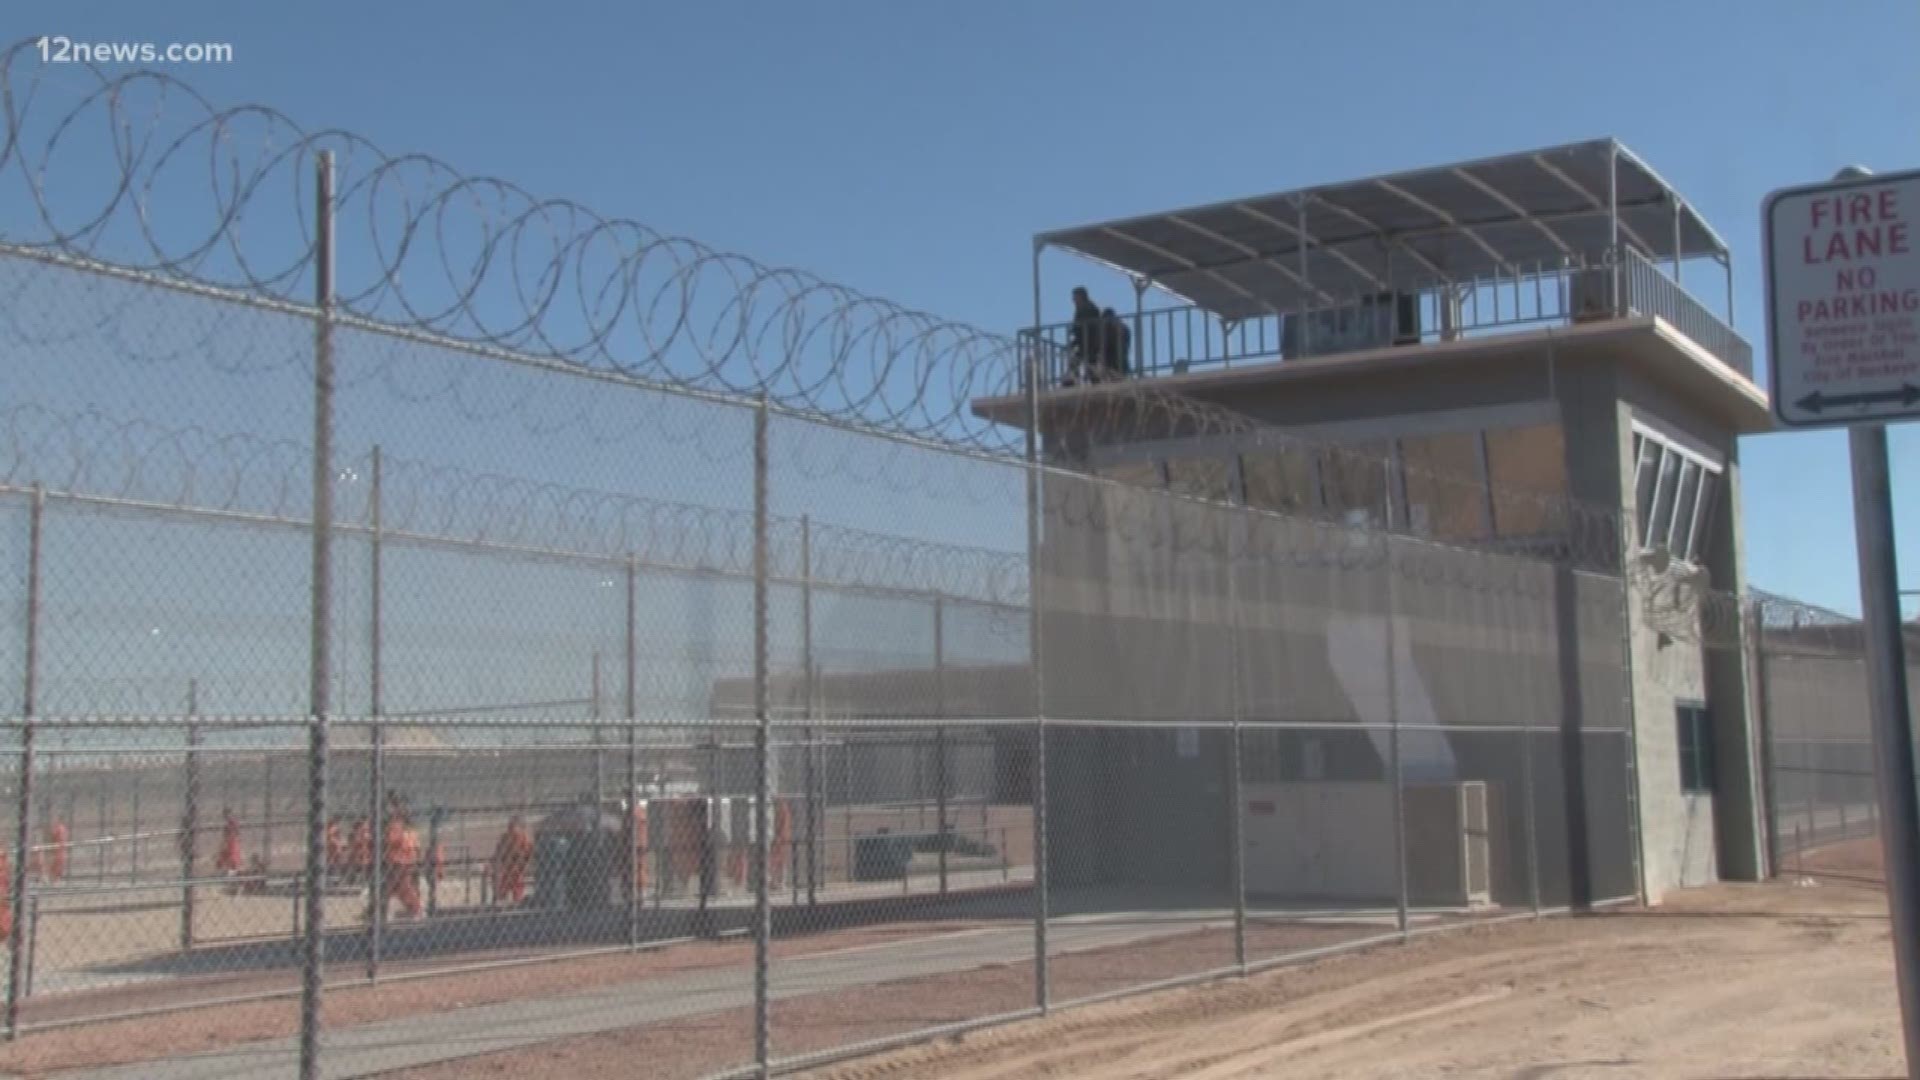 According to the Department of Corrections, nearly a fifth of all officer positions are now vacant across the state's 10 prison complexes. The problem is facing the department is retention. The DOC is constantly hiring, but also losing officers to other law enforcement agencies for better pay.